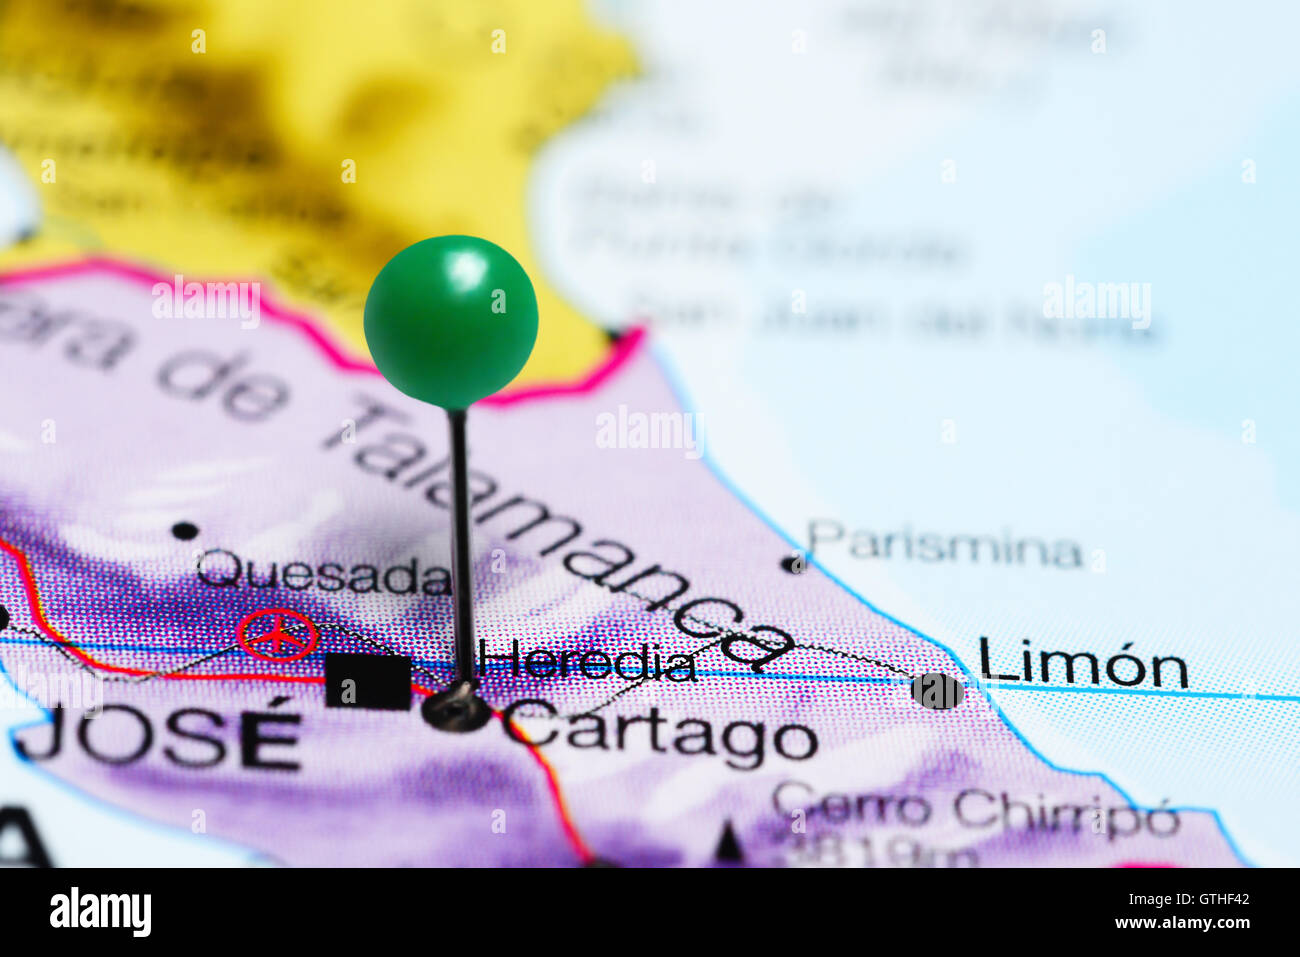 Heredia pinned on a map of Costa Rica Stock Photo